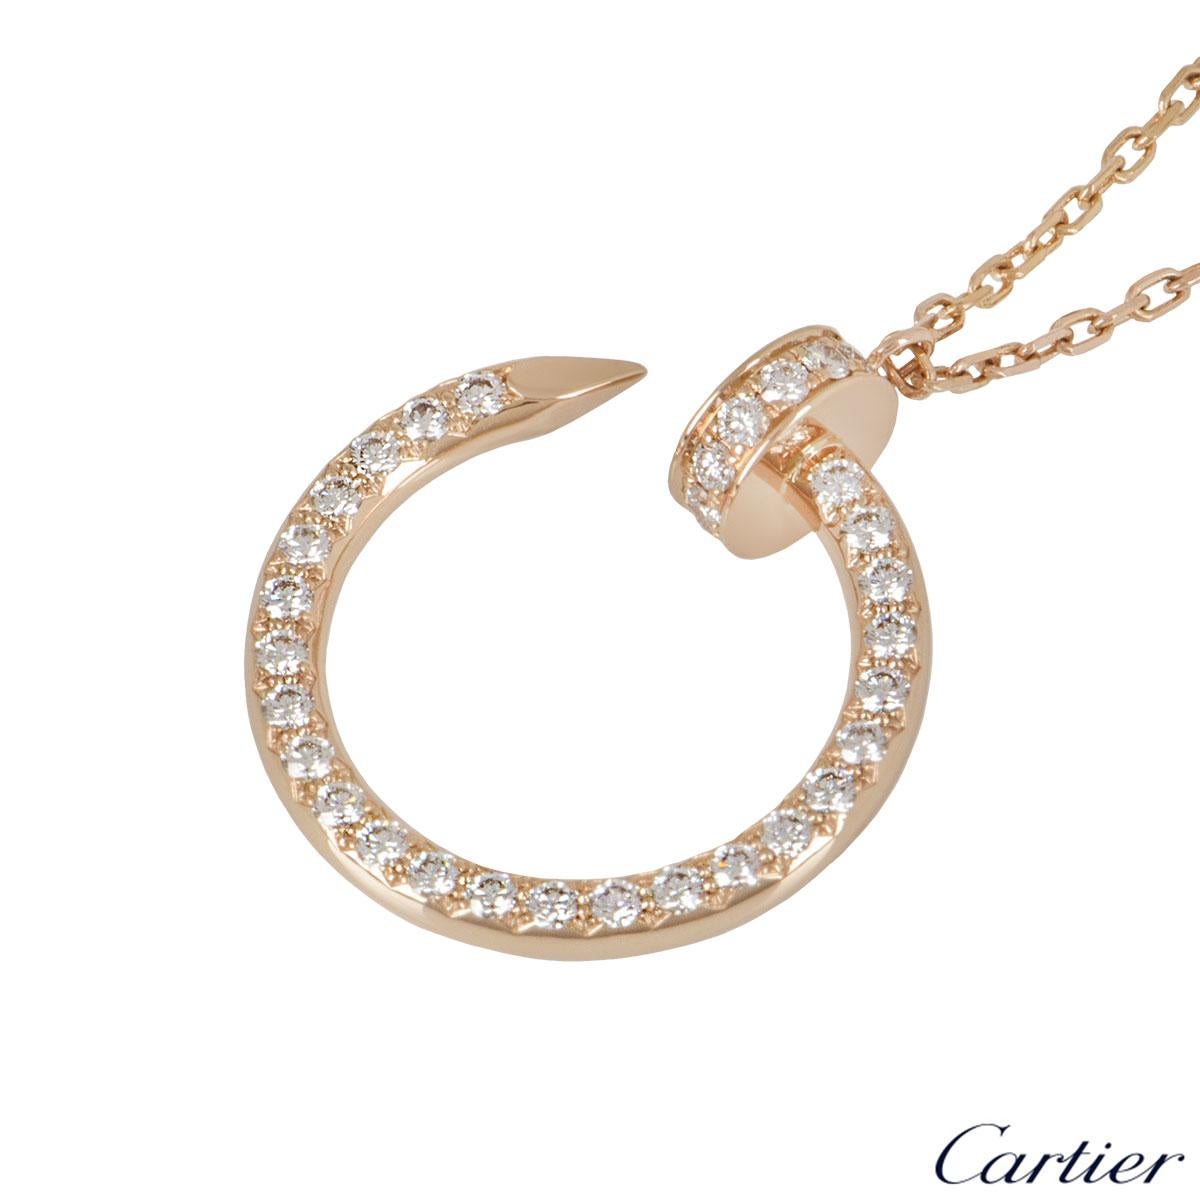 An 18k rose gold pendant by Cartier from the Juste Un Clou collection. The pendant is in the style of a nail pave set with 36 round brilliant cut diamond from the head to the tip. The diamonds have a weight of 0.38ct. The pendant features a lobster